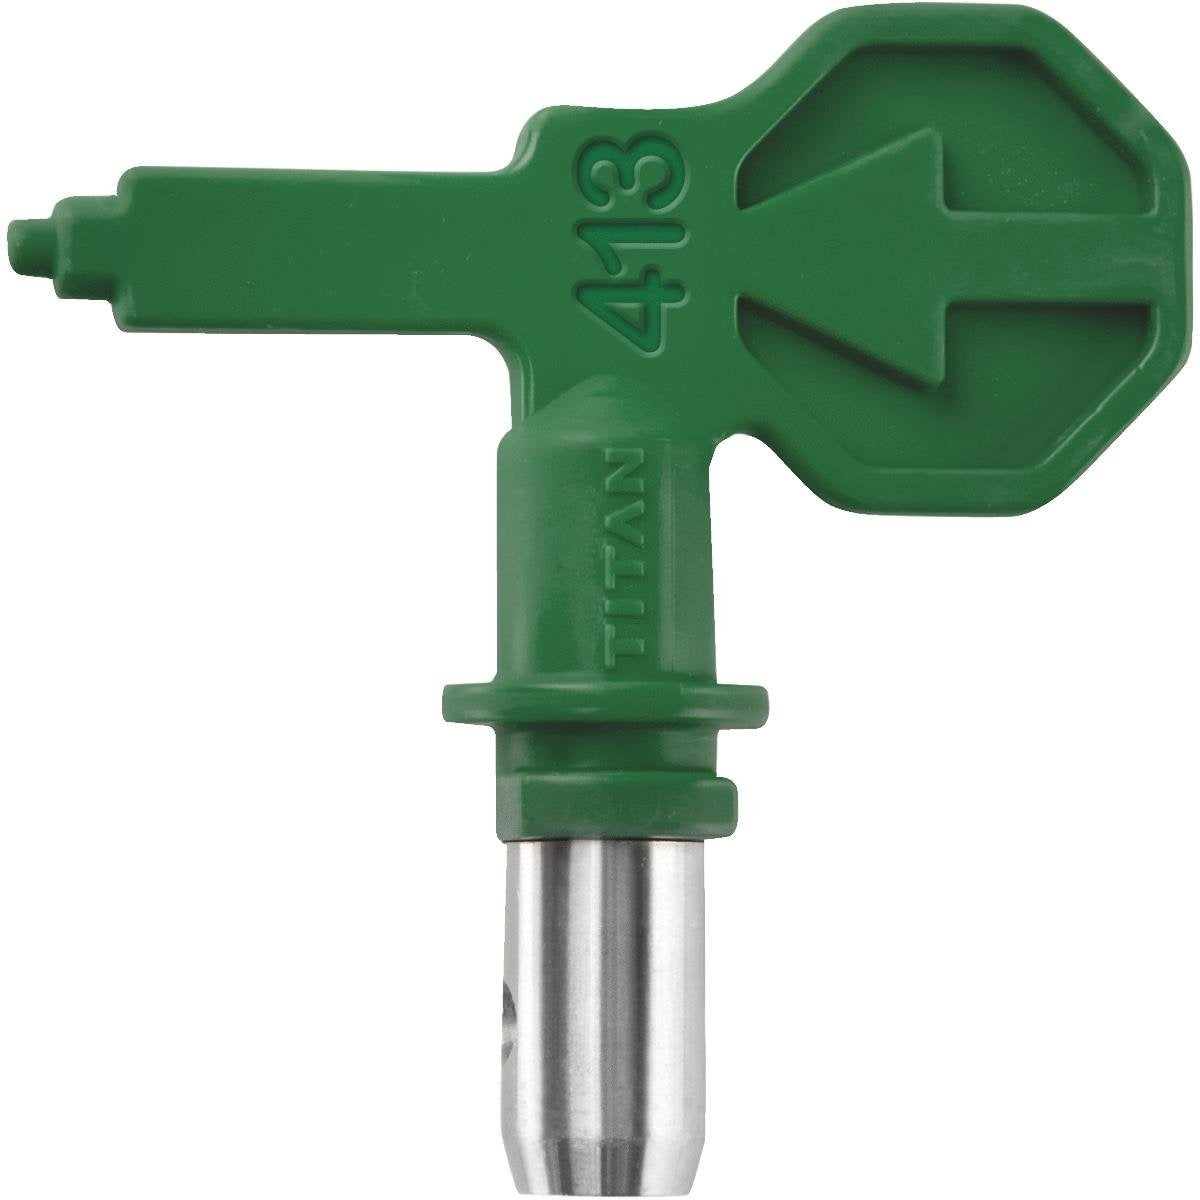 Wagner 0580605 Control Pro 413 Airless Spray Tip